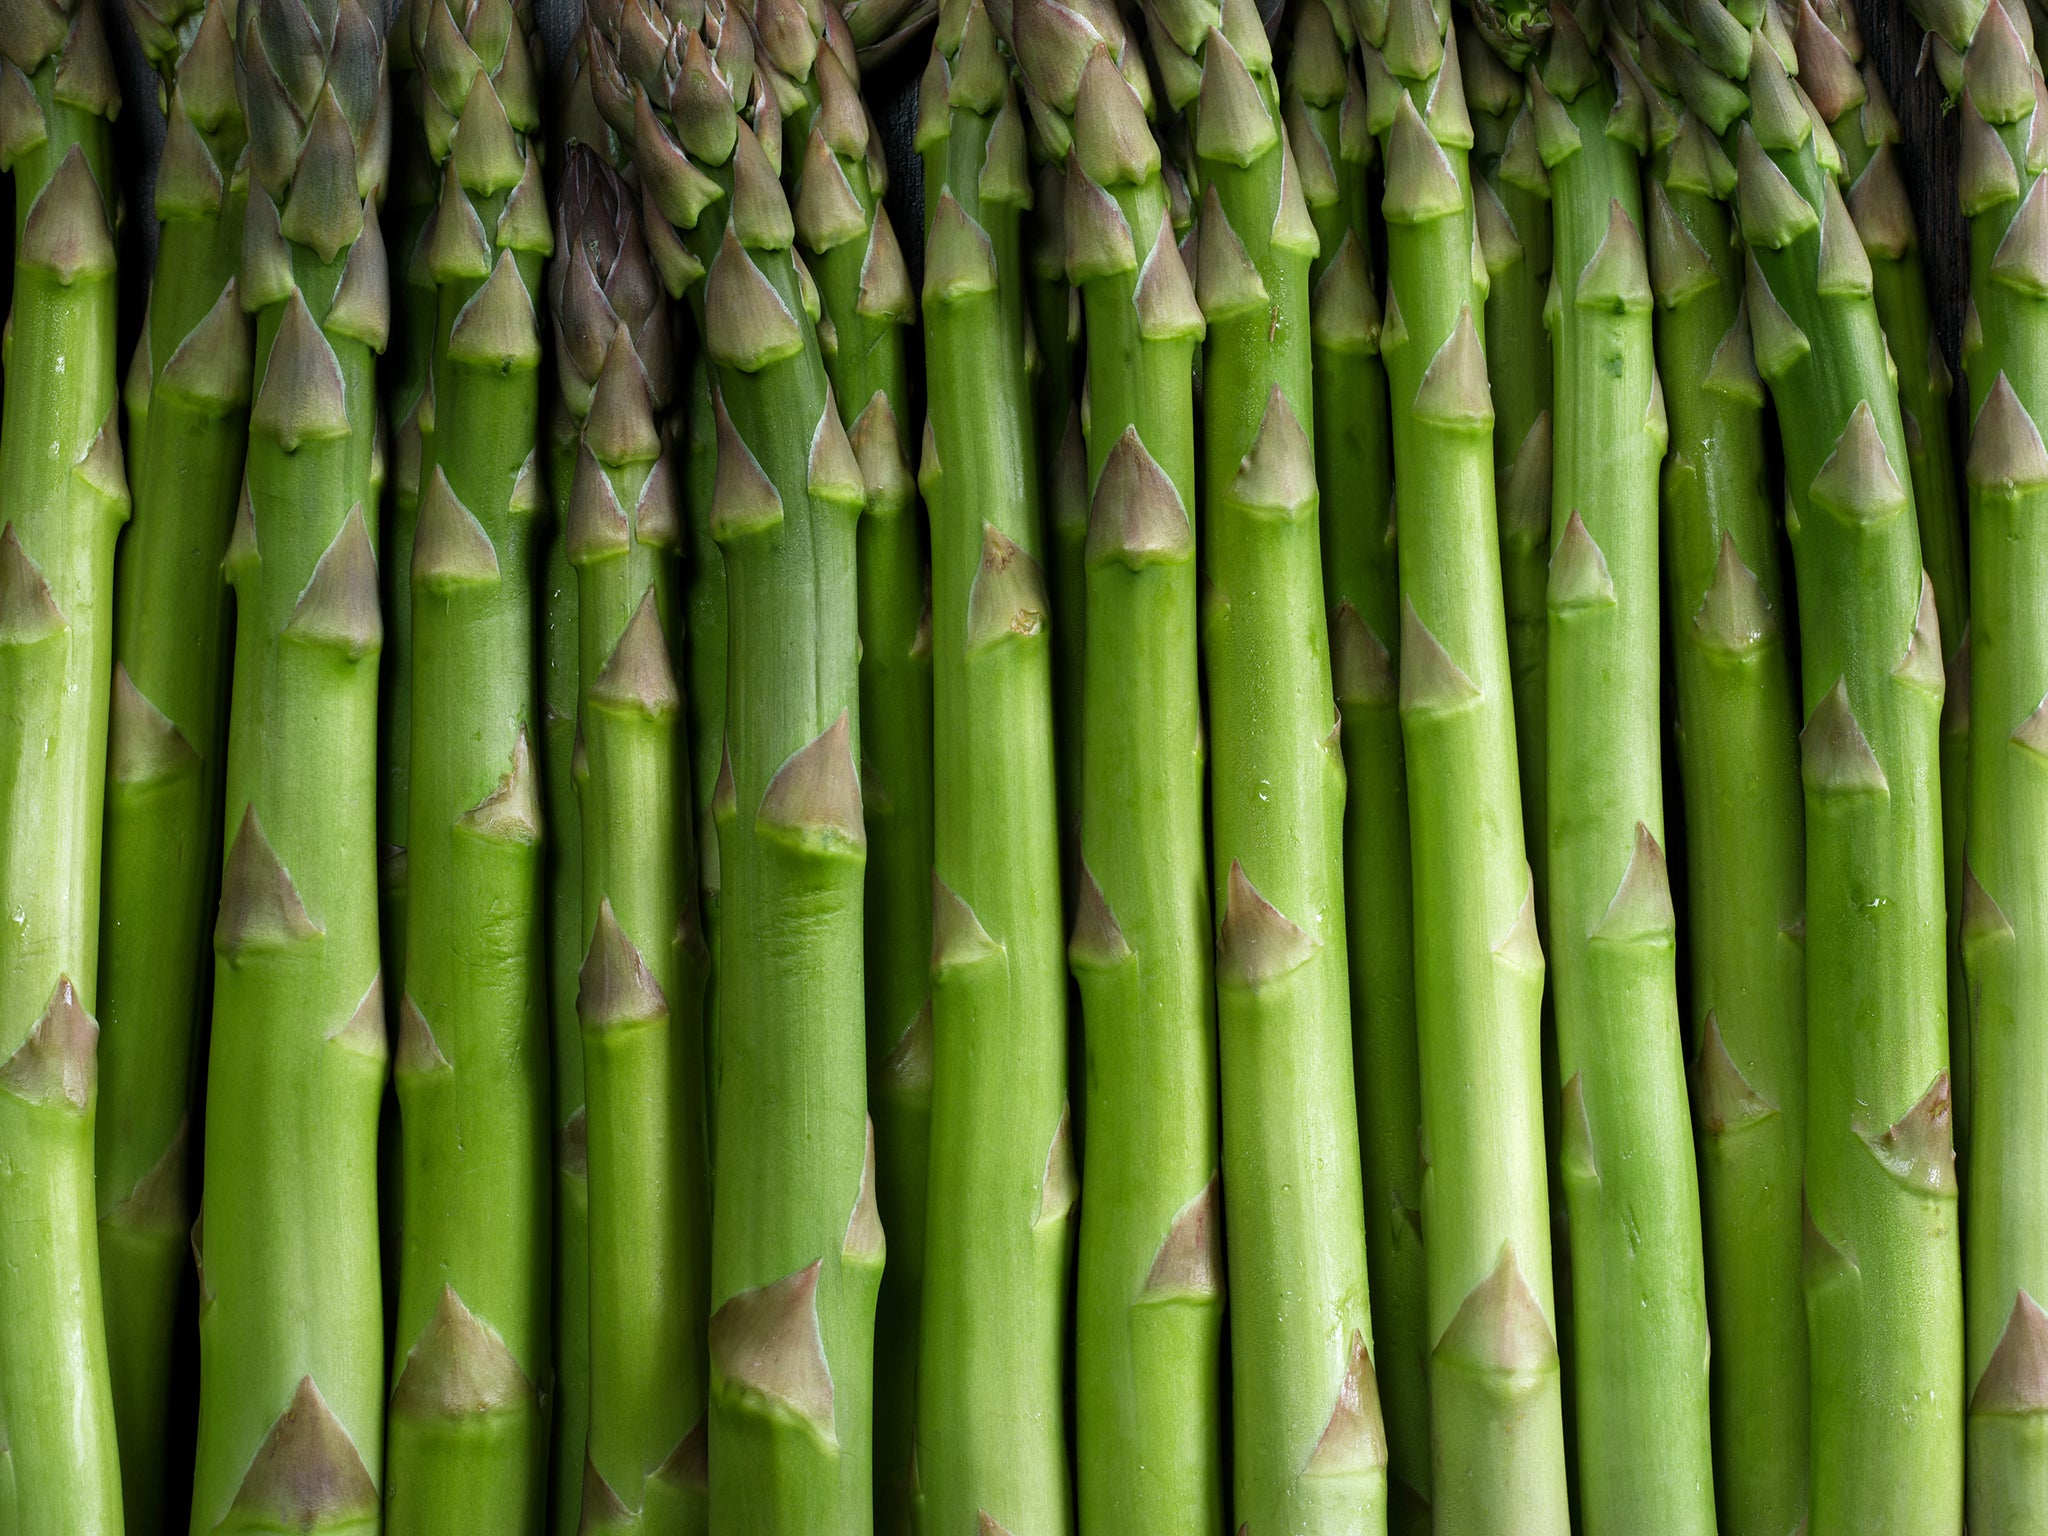 Asparagus season runs from the end of February to June